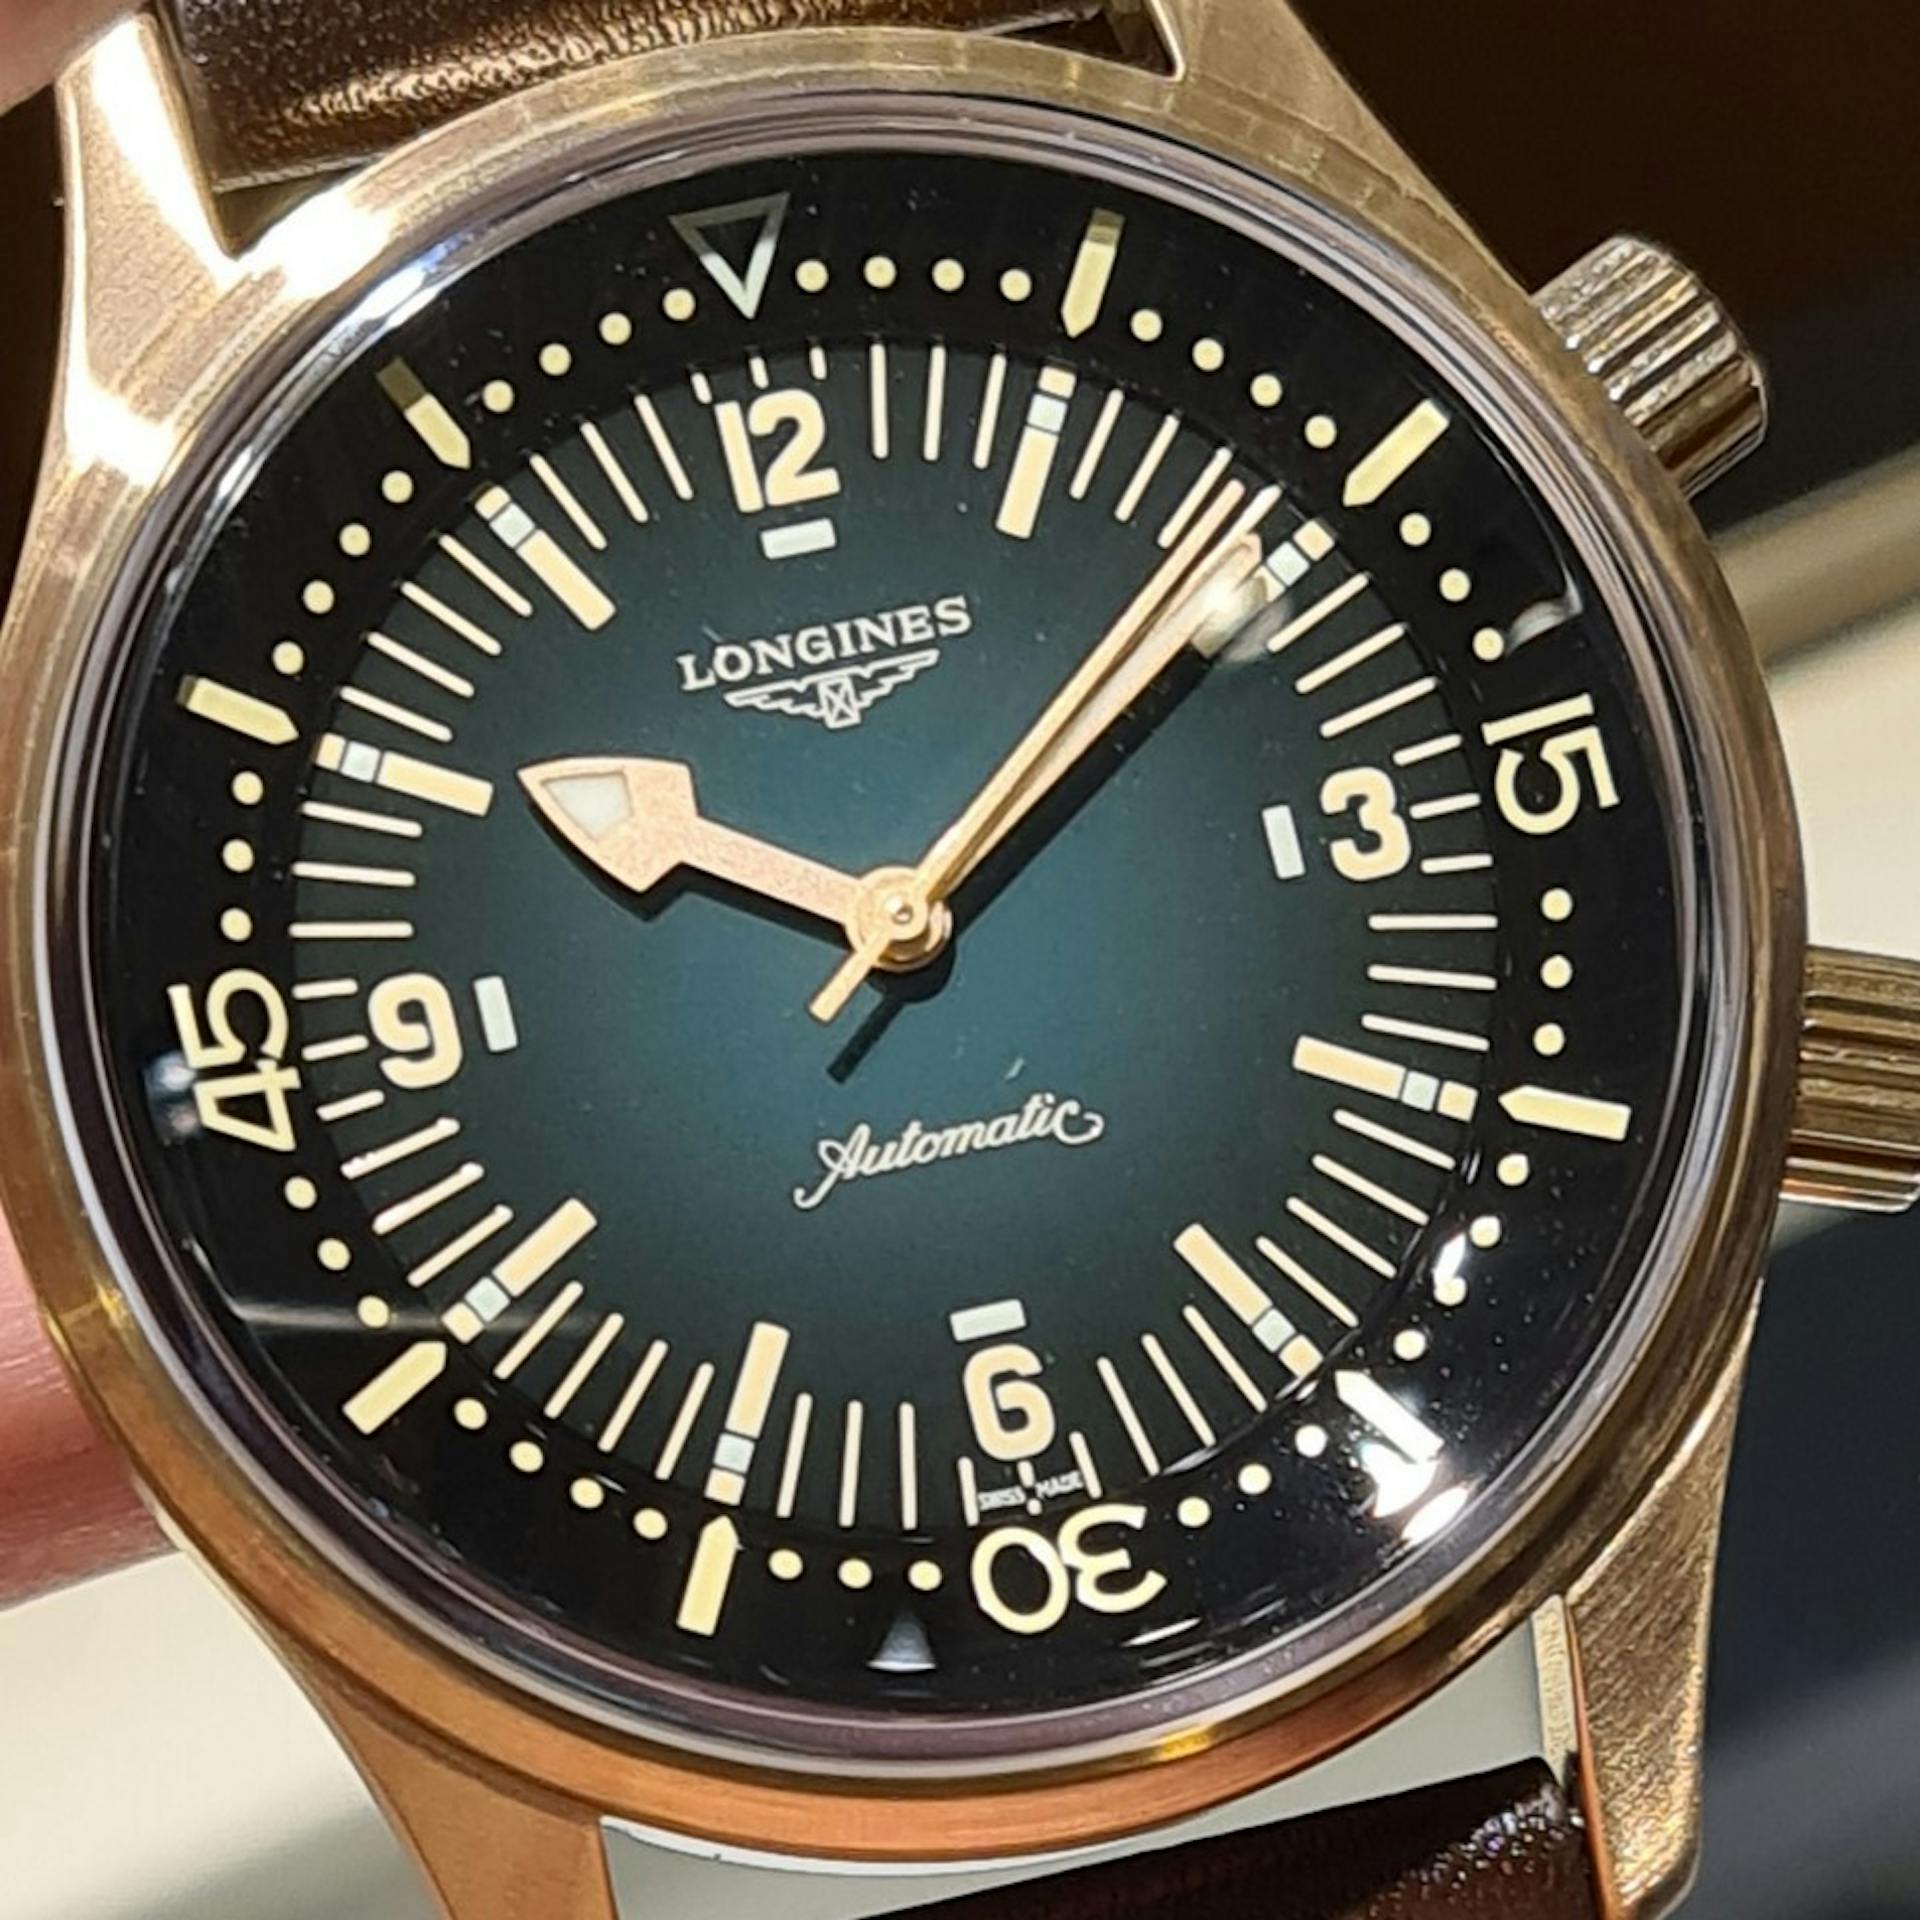 Longines Heritage Diver with an internal rotating bezel to allow for Dive timing